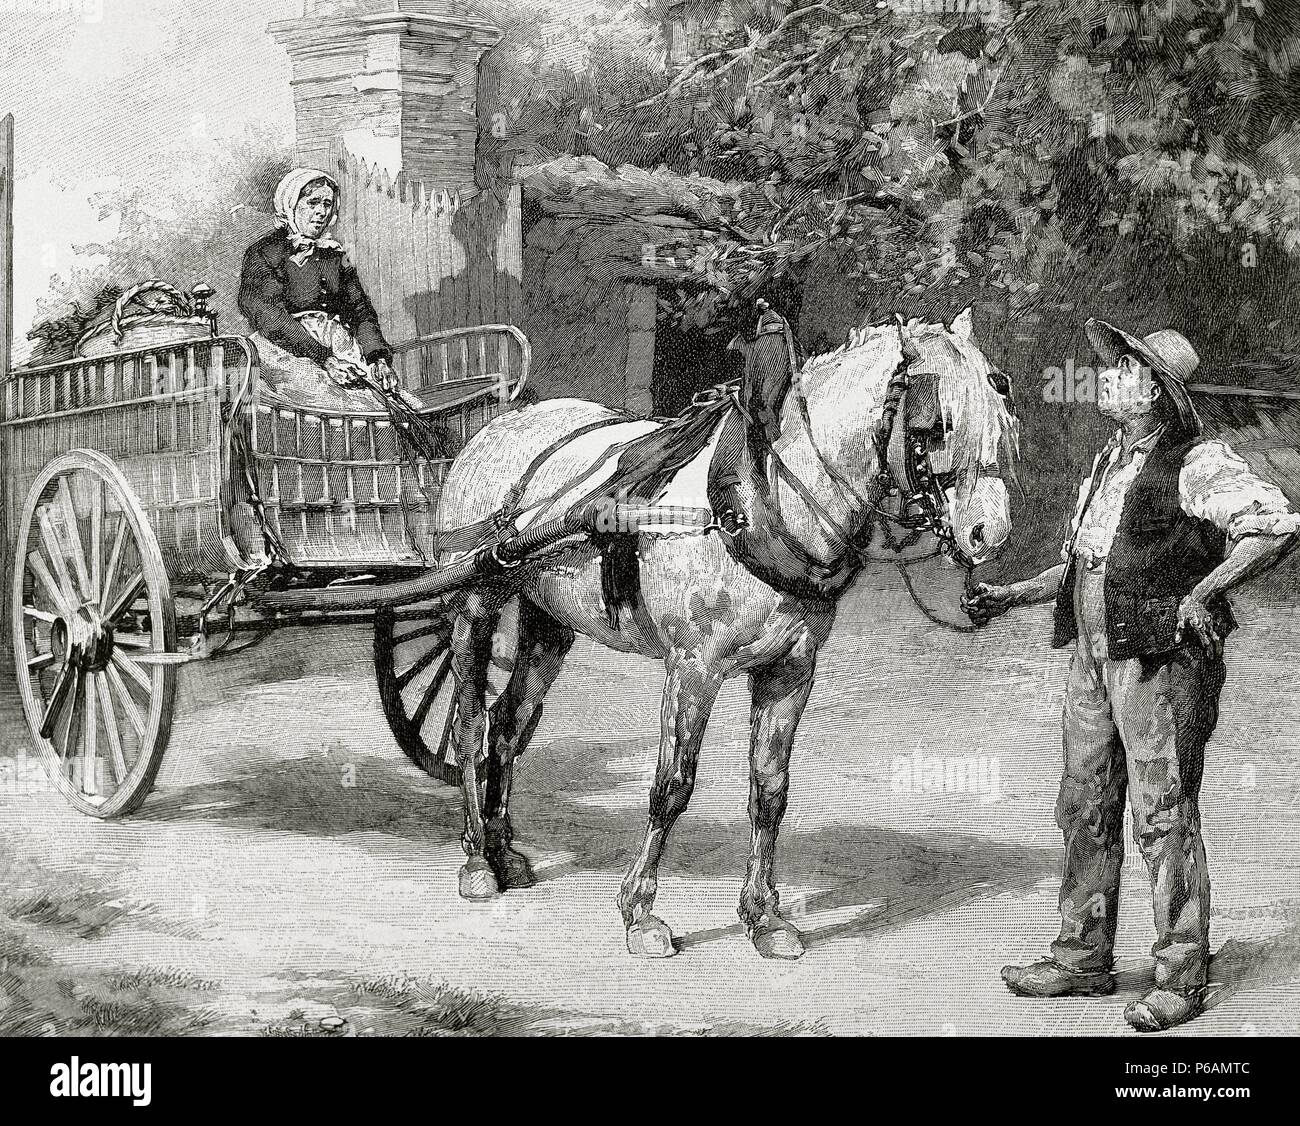 Peasant family with a chariot. Engraving by Huyot, 1880. Stock Photo